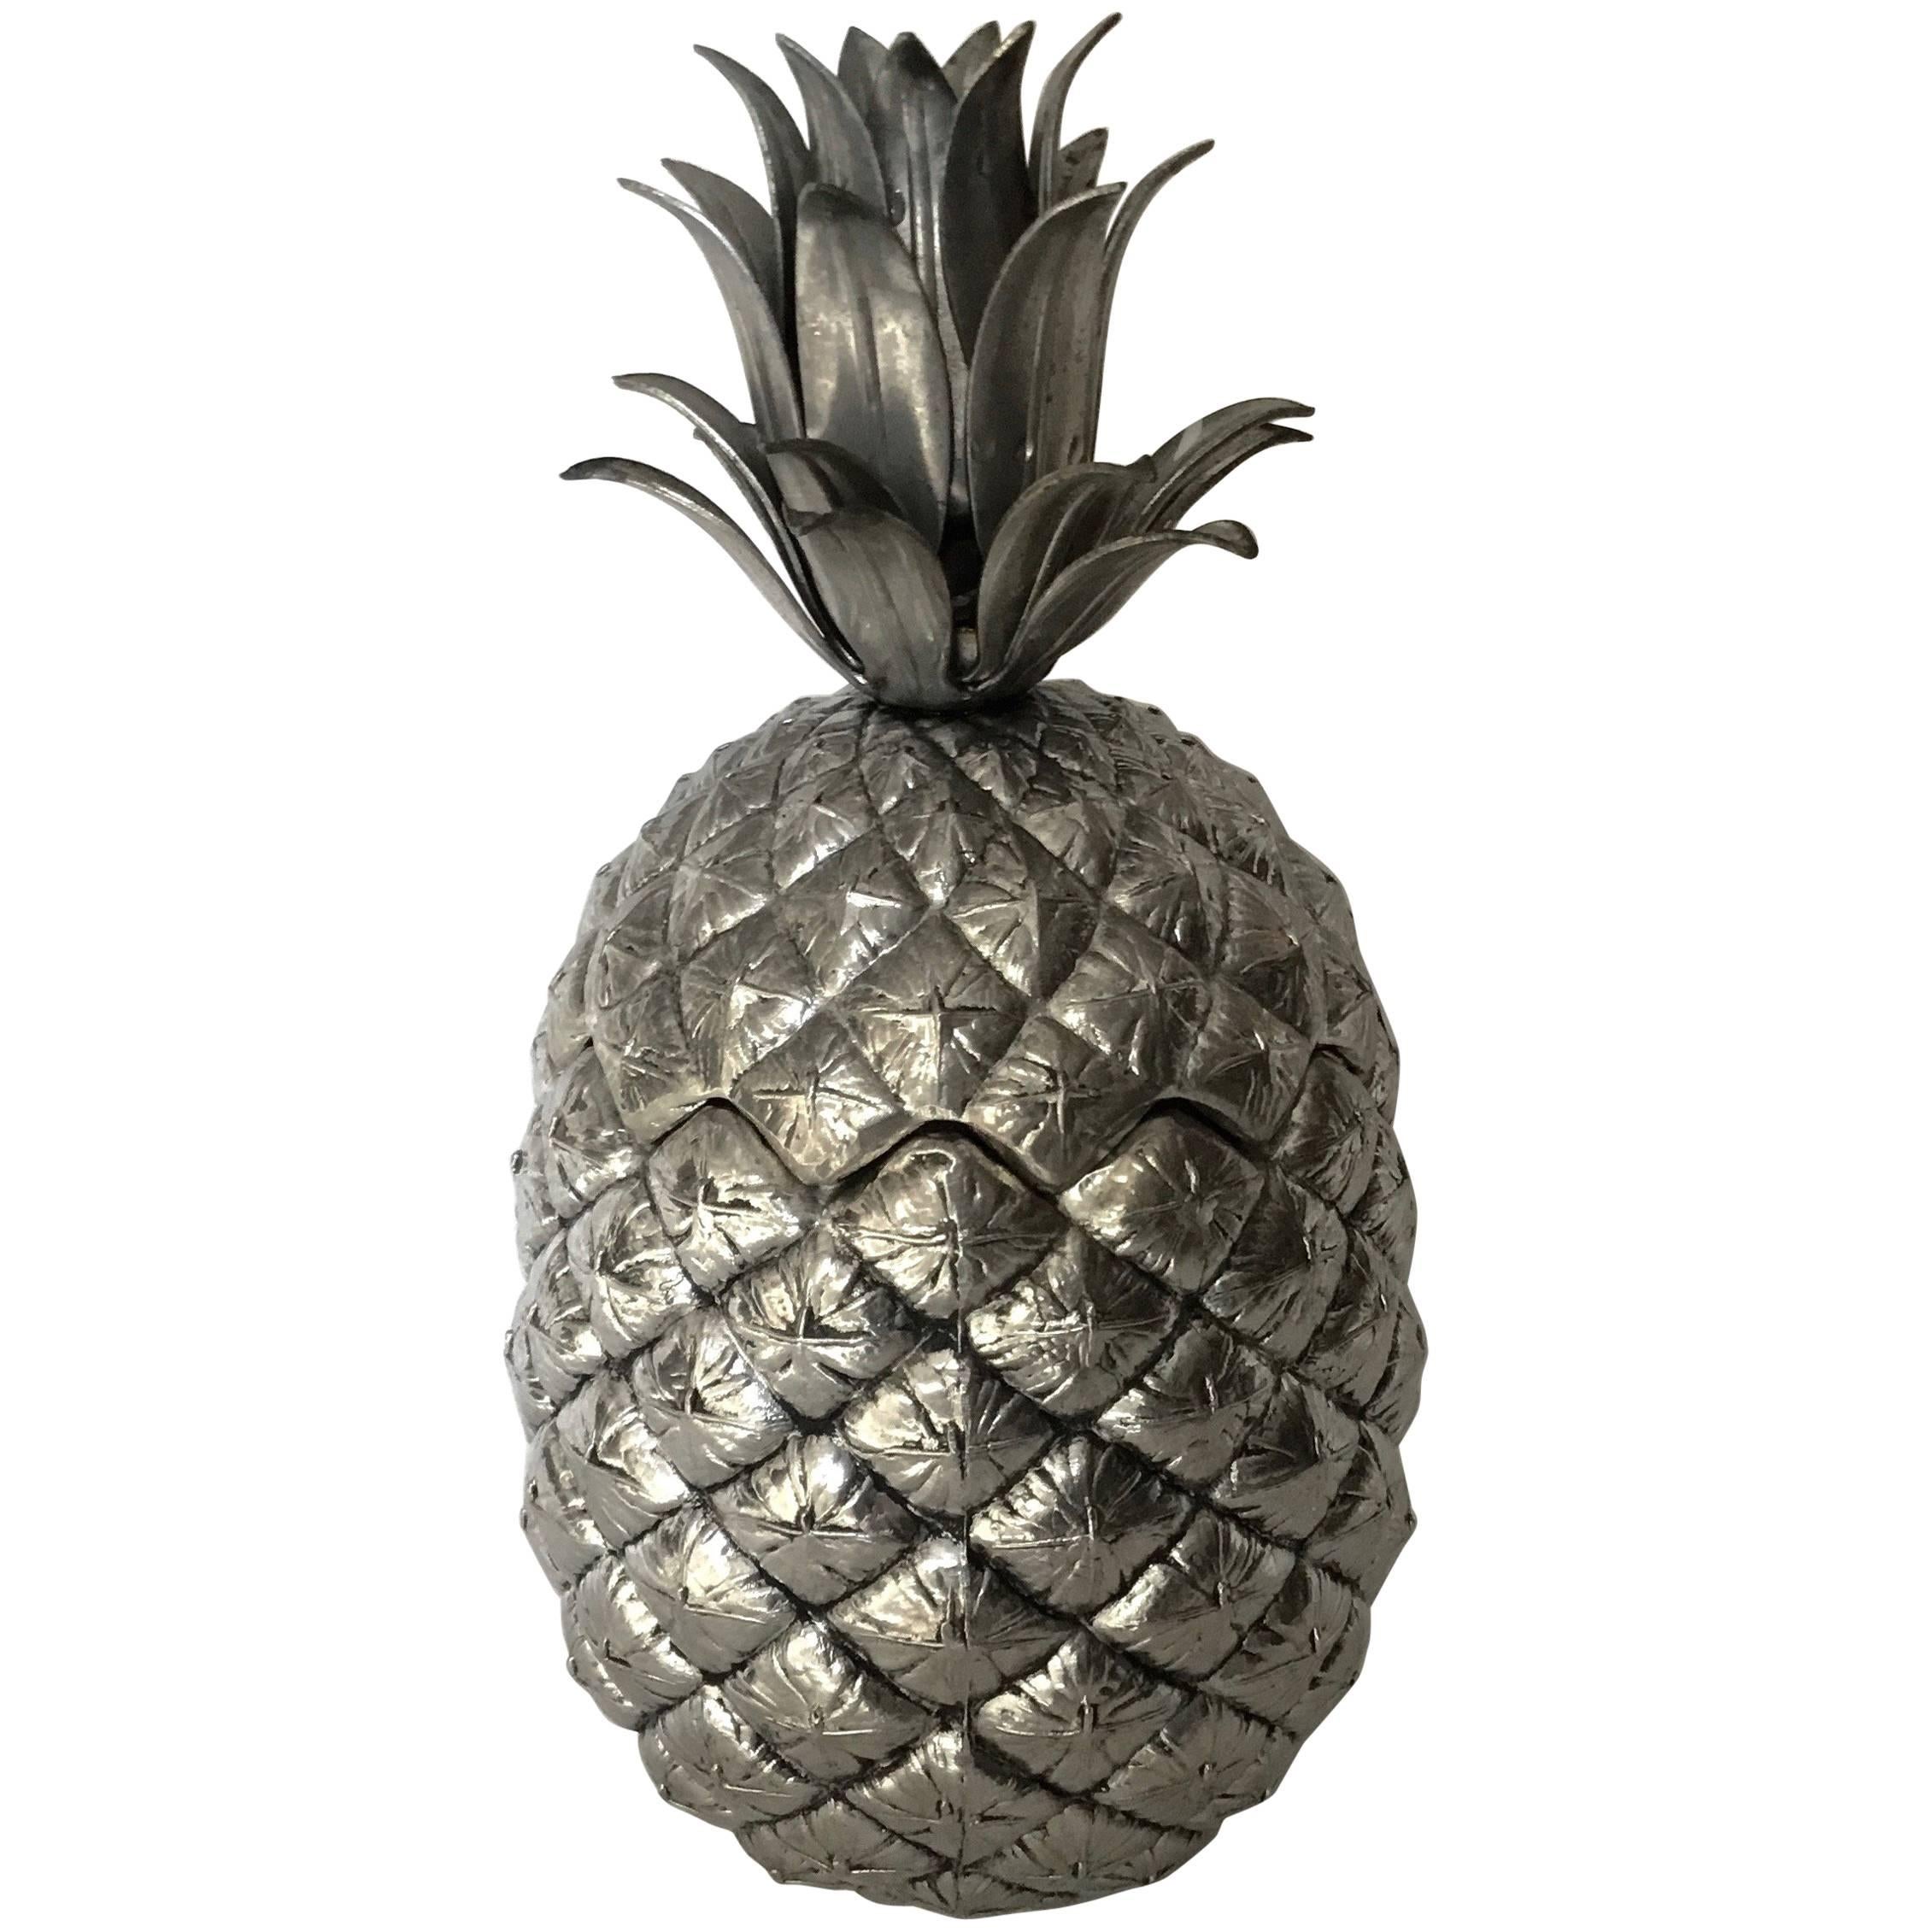 Mauro Manetti Pineapple Ice Bucket For Sale